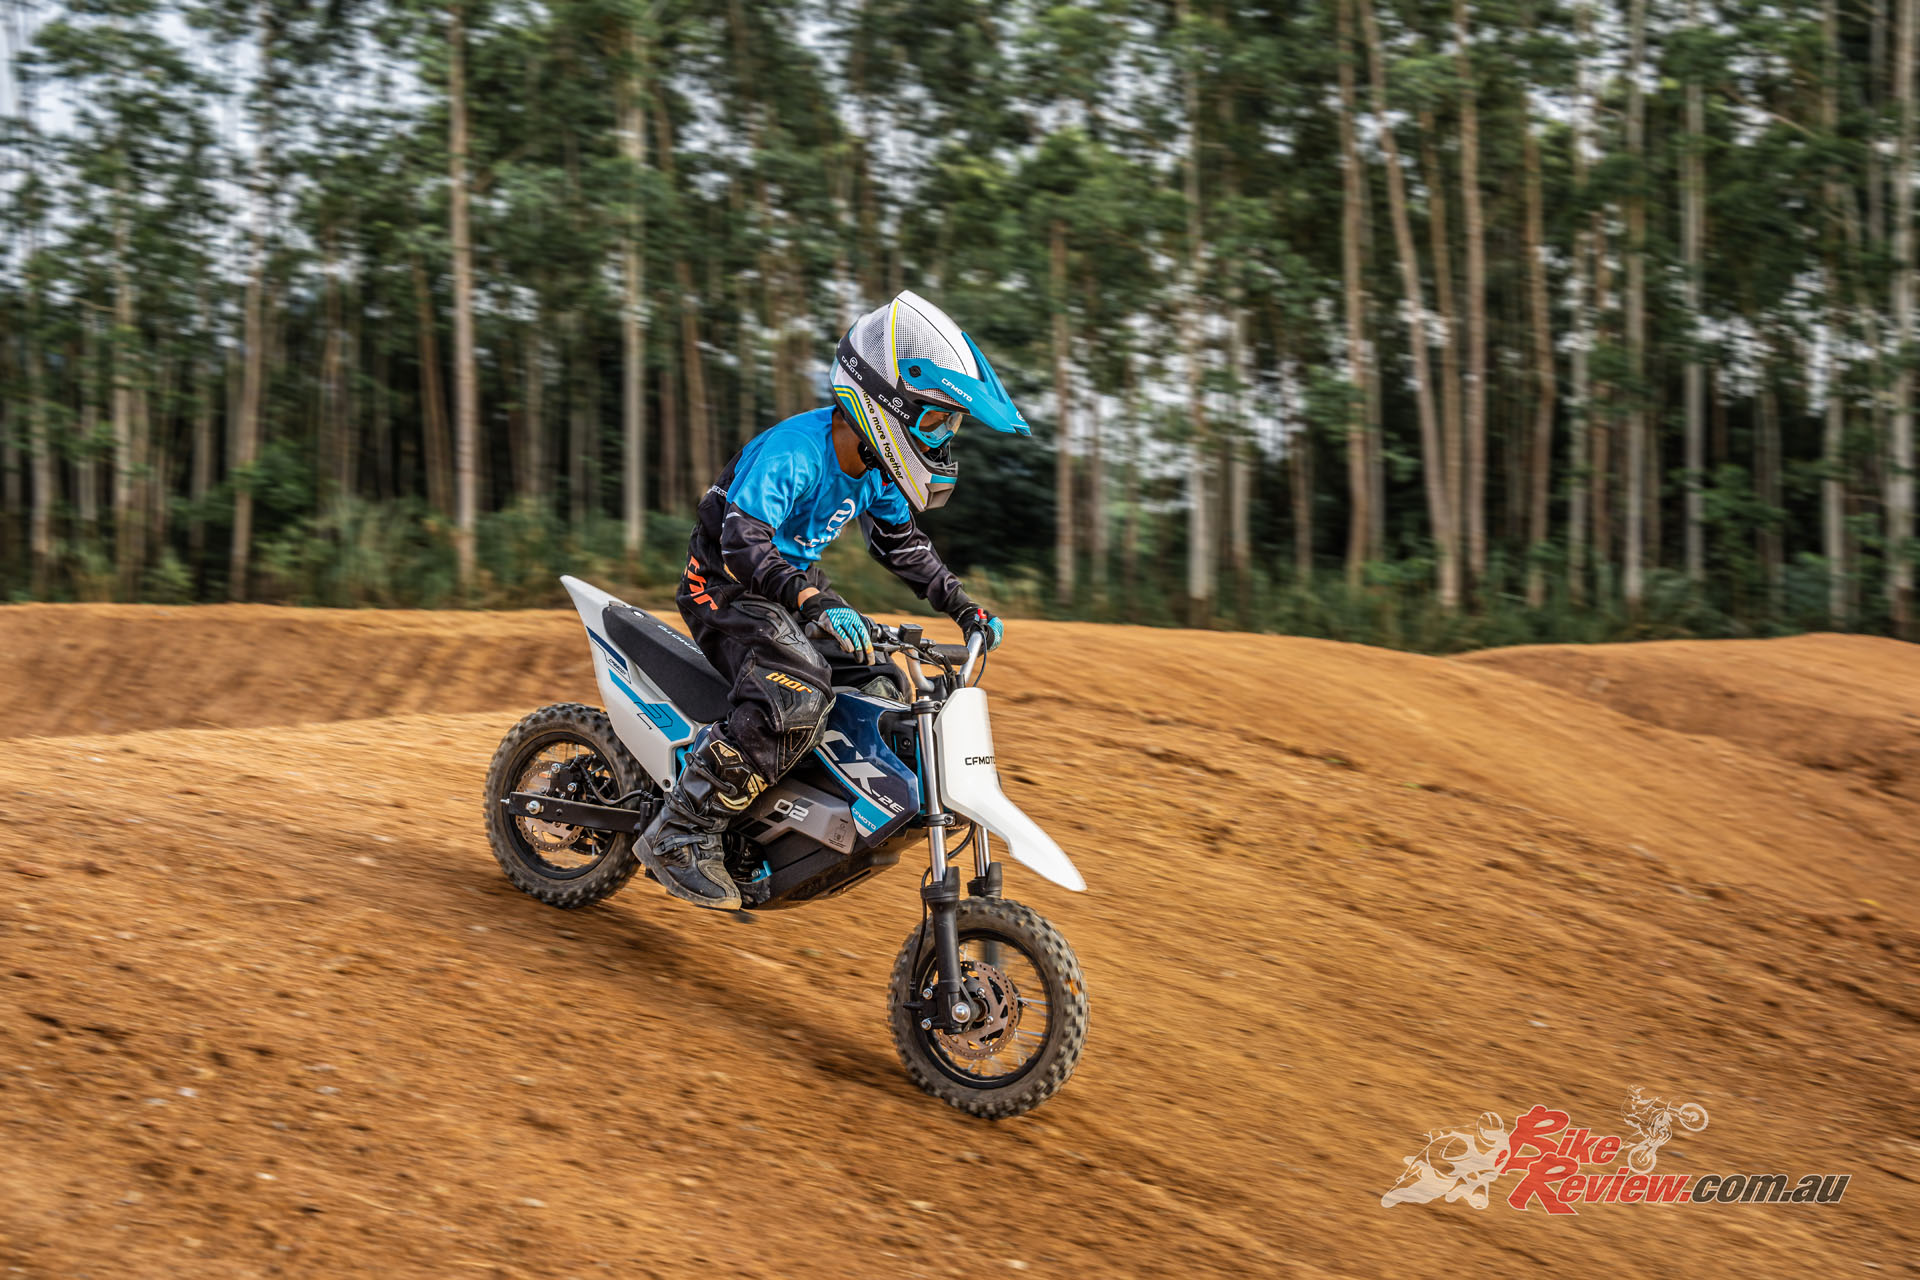 CFMOTO's CX-2E and CX-5E electric minibikes are set to hit the Australian market in late September. The manufacturer's suggested retail price for the CX-2E is $2,190 ride away.